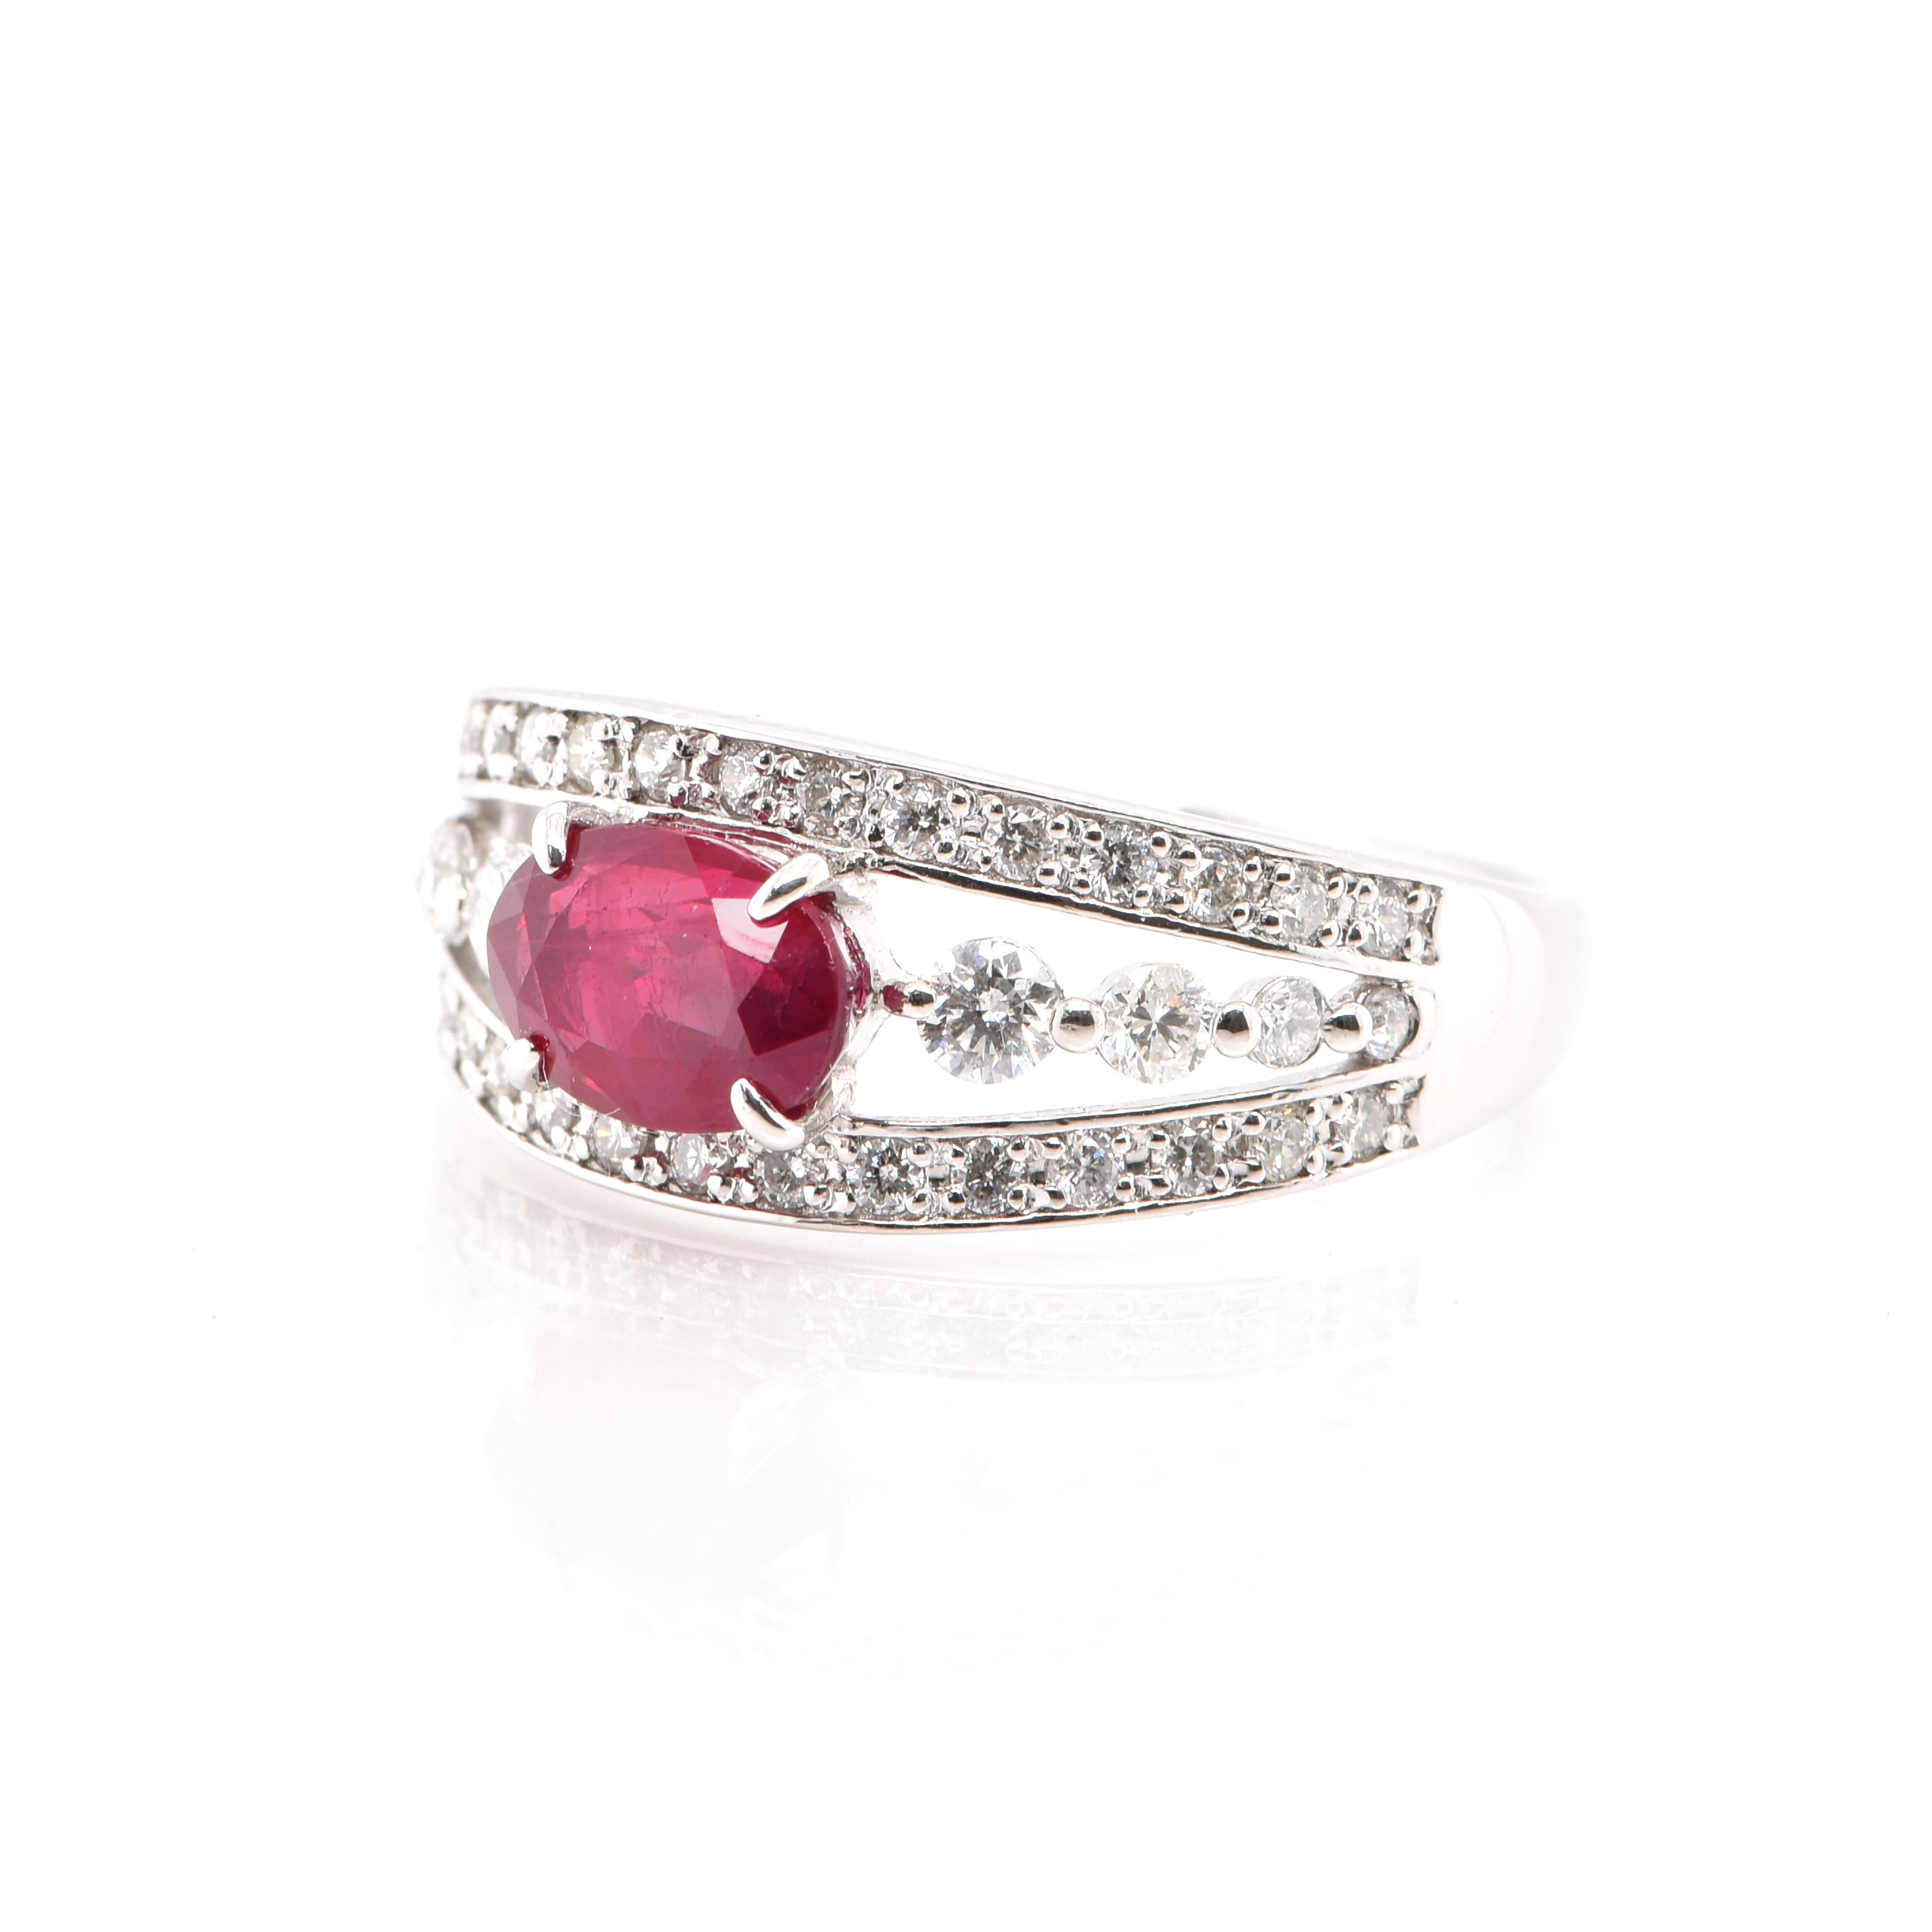 A beautiful Engagement Ring featuring a 1.34 Carat, Natural Ruby and 0.51 Carats of Round Brilliant Diamonds set in Platinum. Rubies are referred to as 